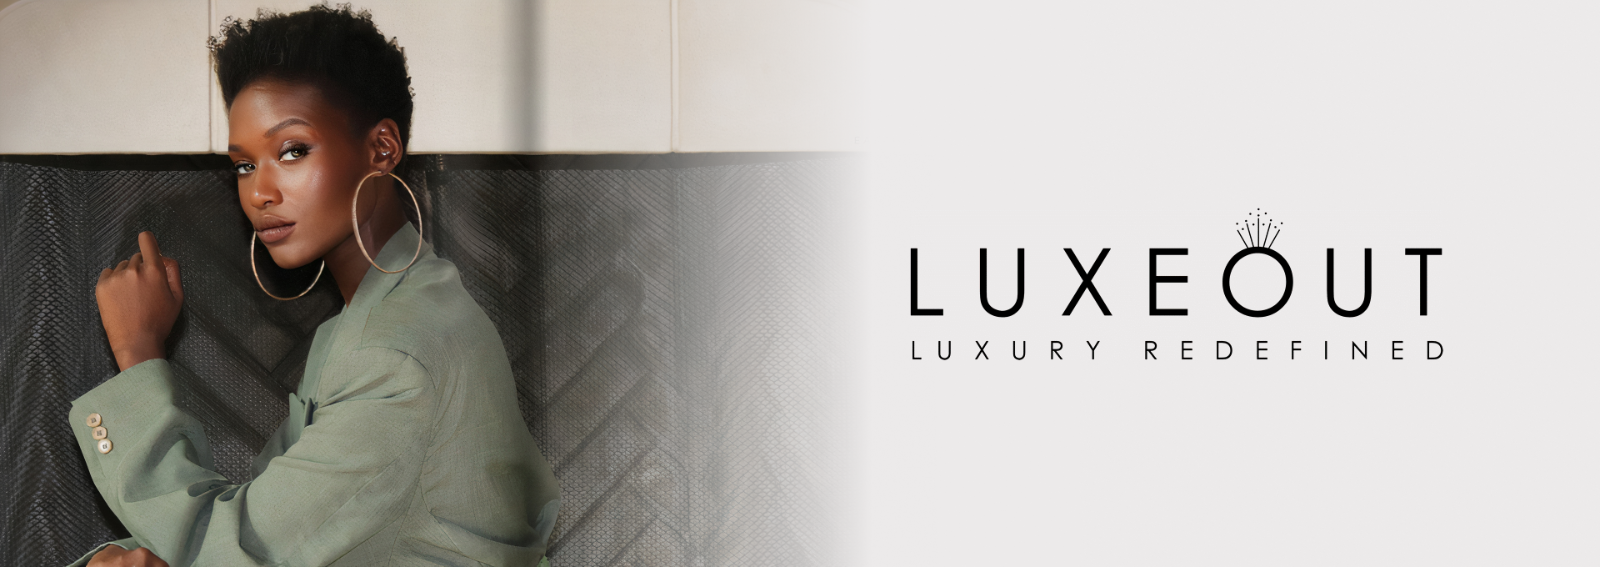 Luxeout